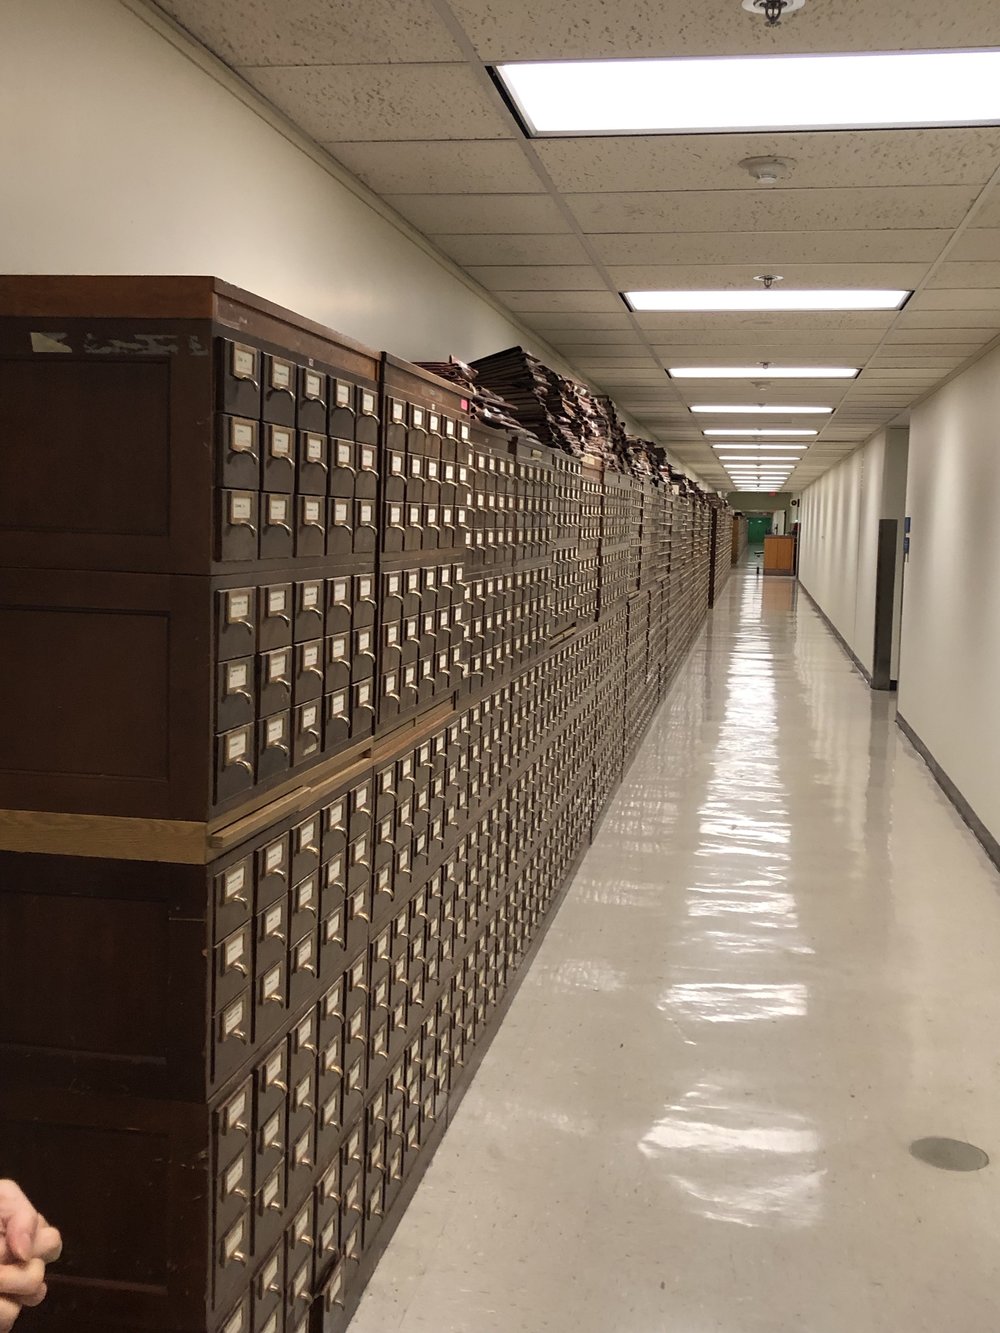 The Card Catalog is Kind of Big...